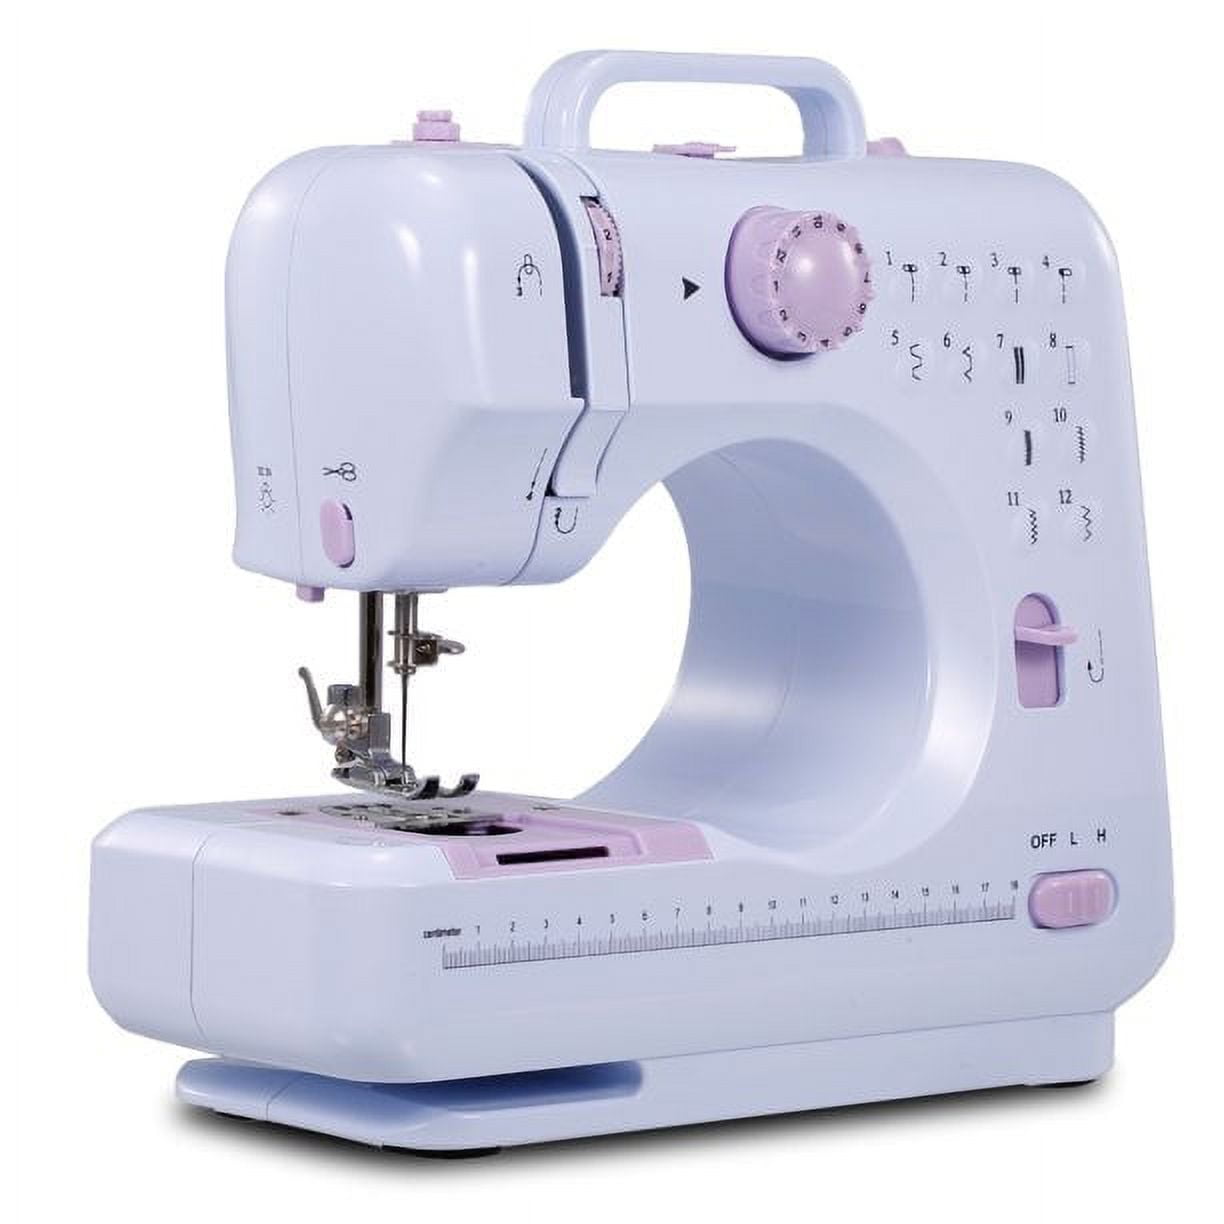 Best Choice Products 6V Compact Sewing Crafting Machine, White,Pink